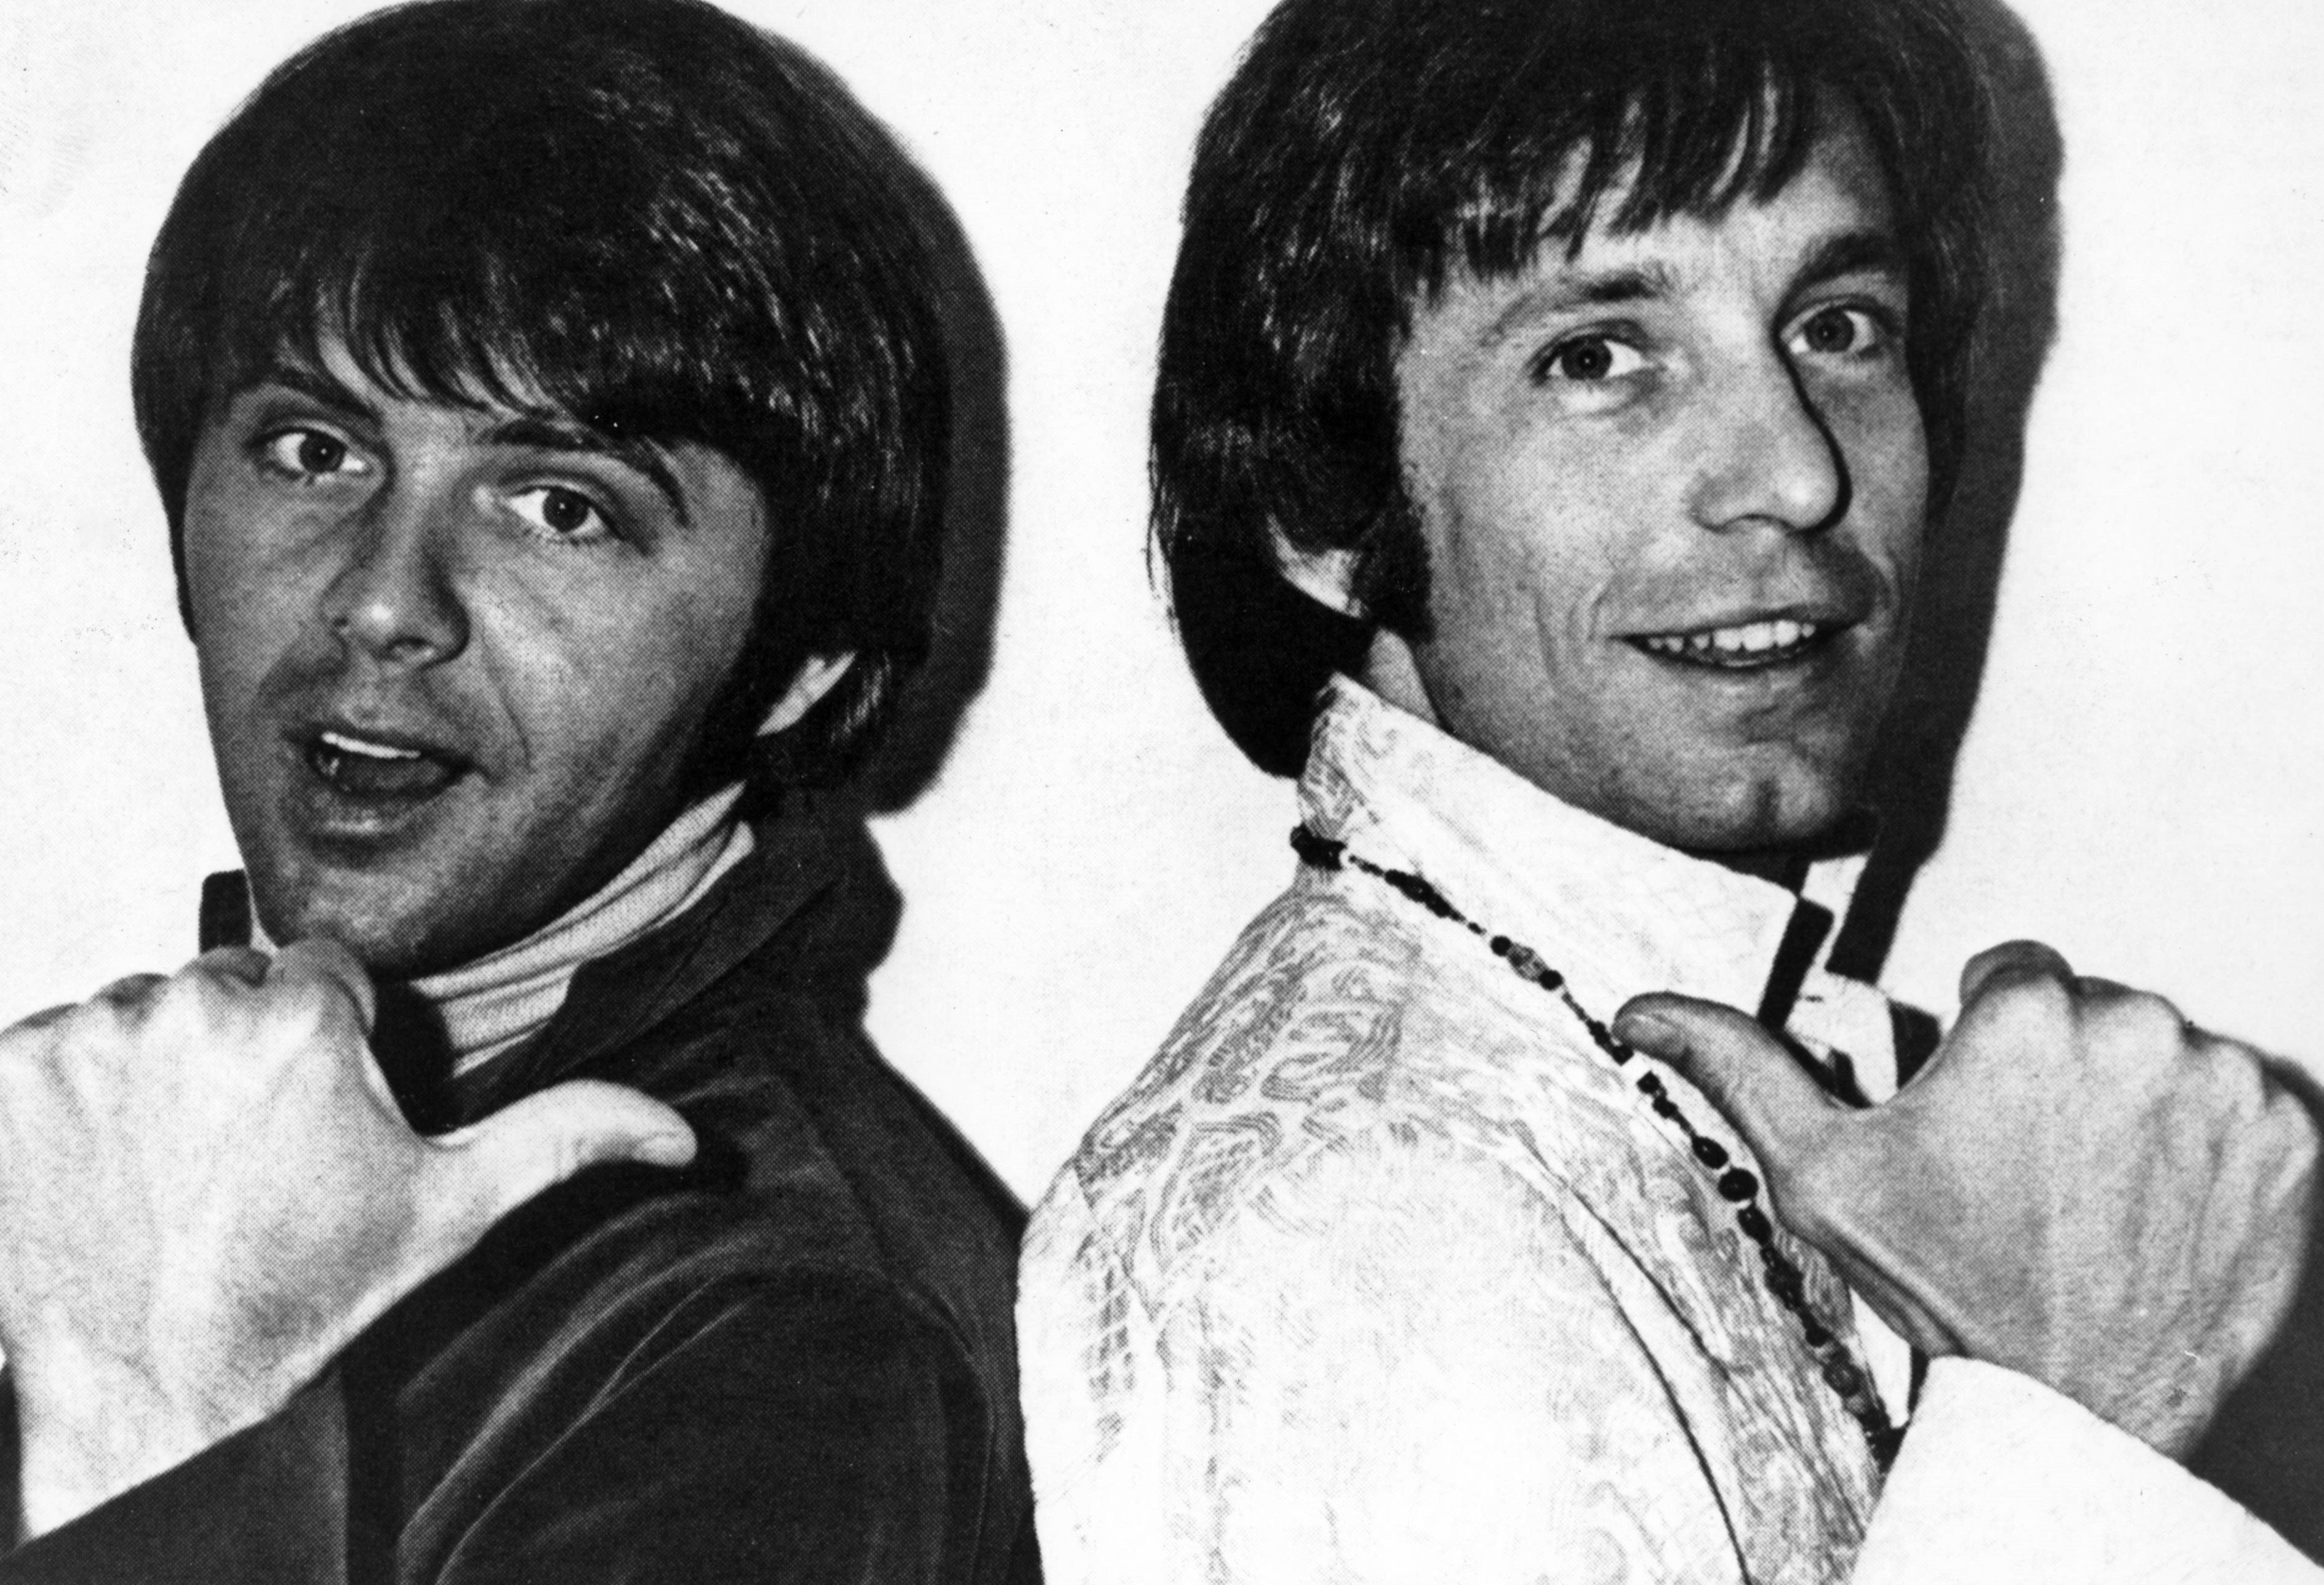 The Monkees' songwriters Tommy Boyce and Bobby Hart pointing at each other